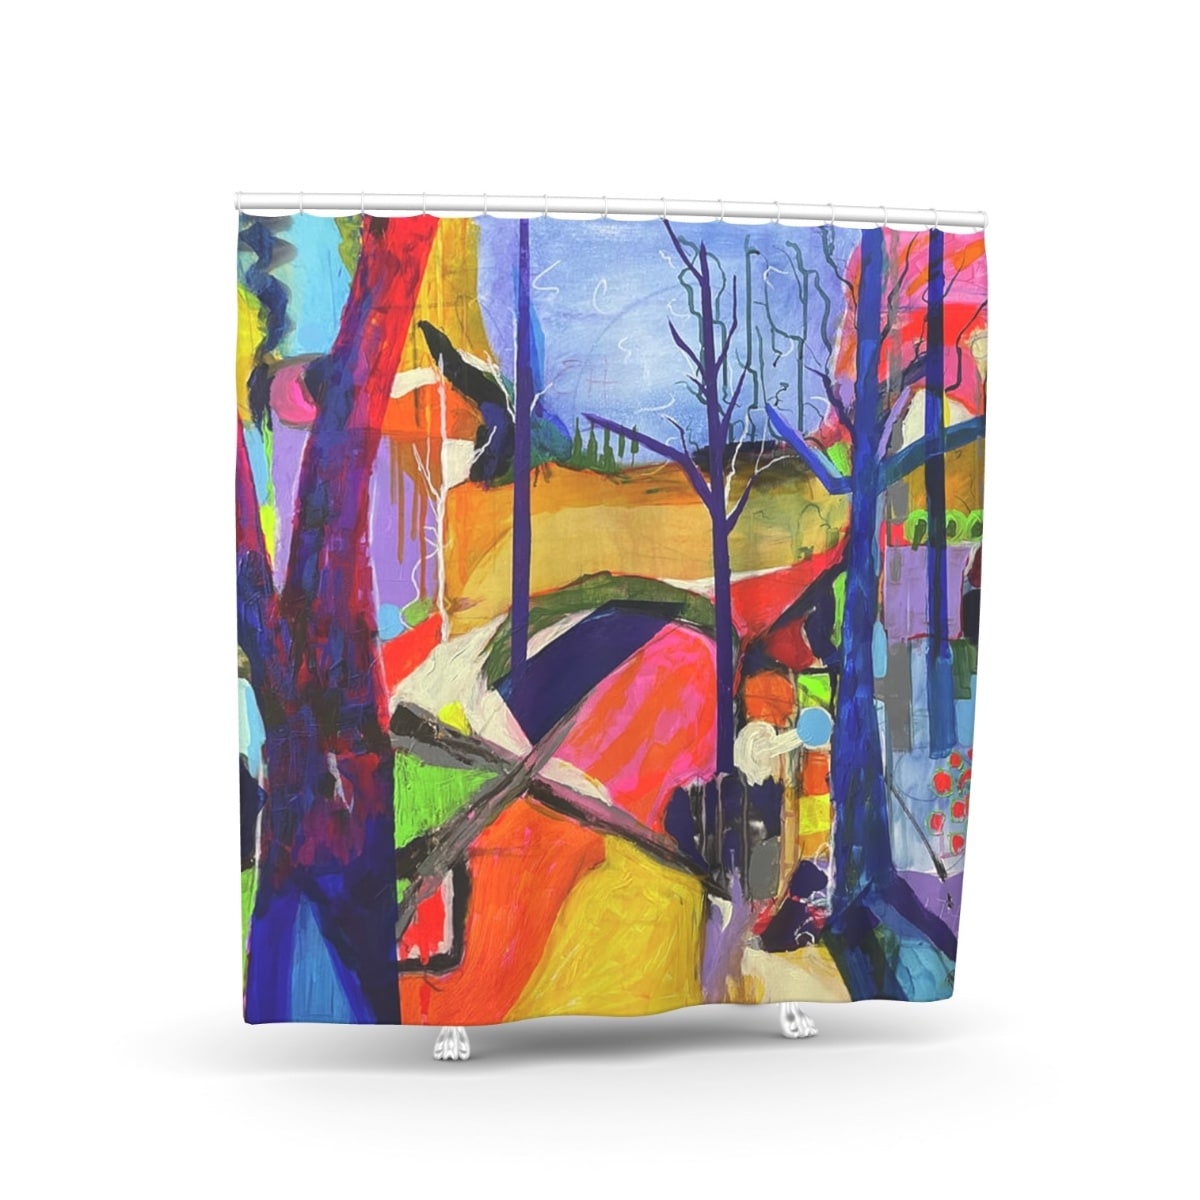 Image of Shower Curtain with Art Print